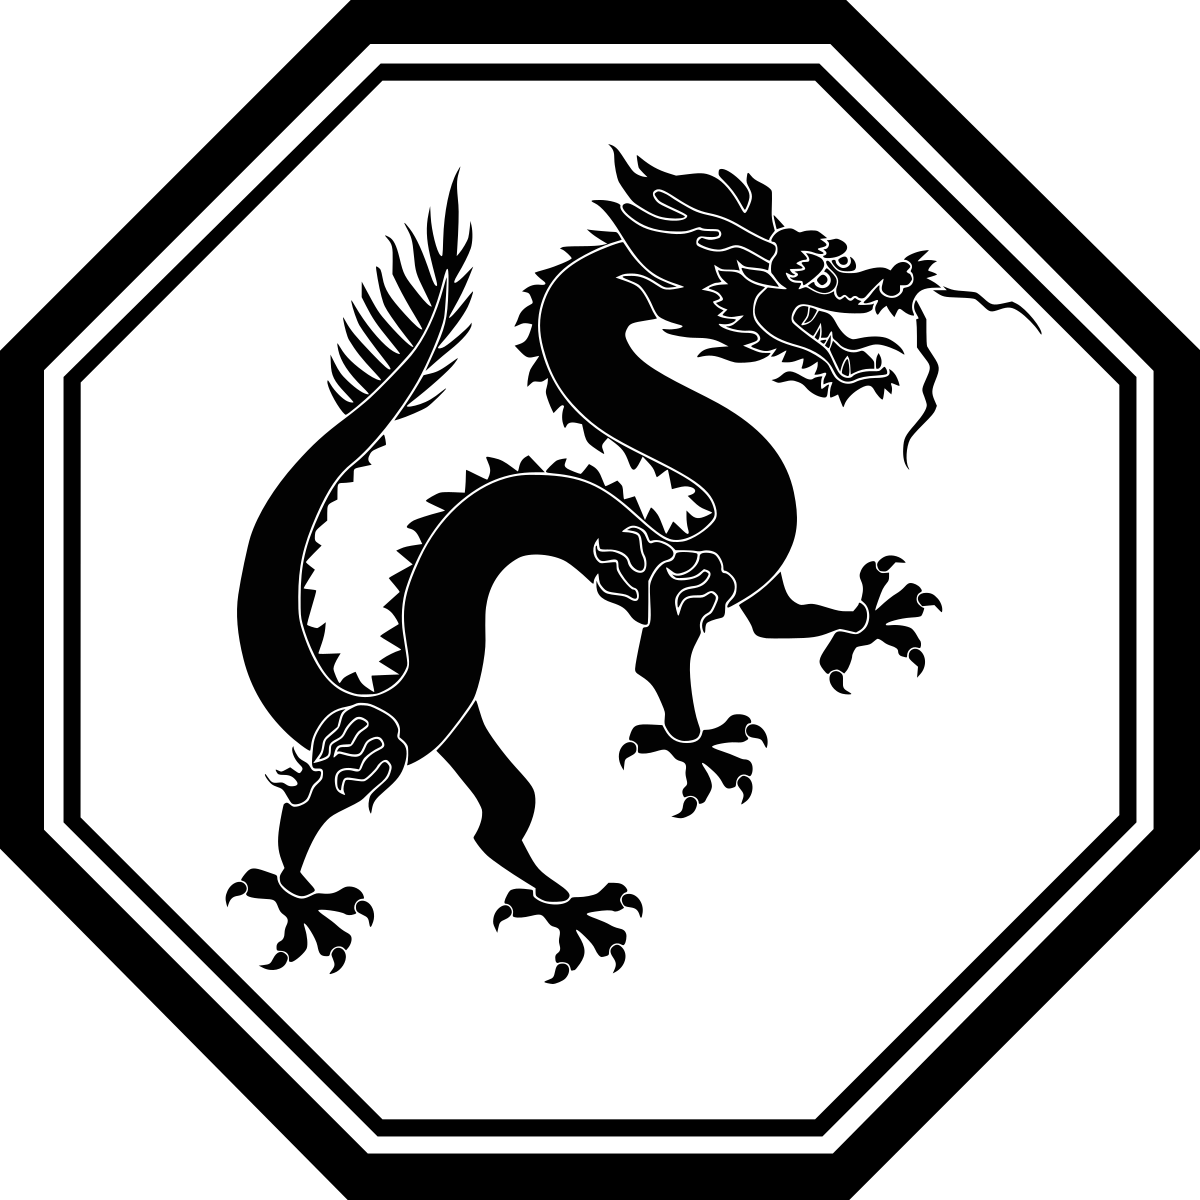 Chinese Dragon Silhouette Png